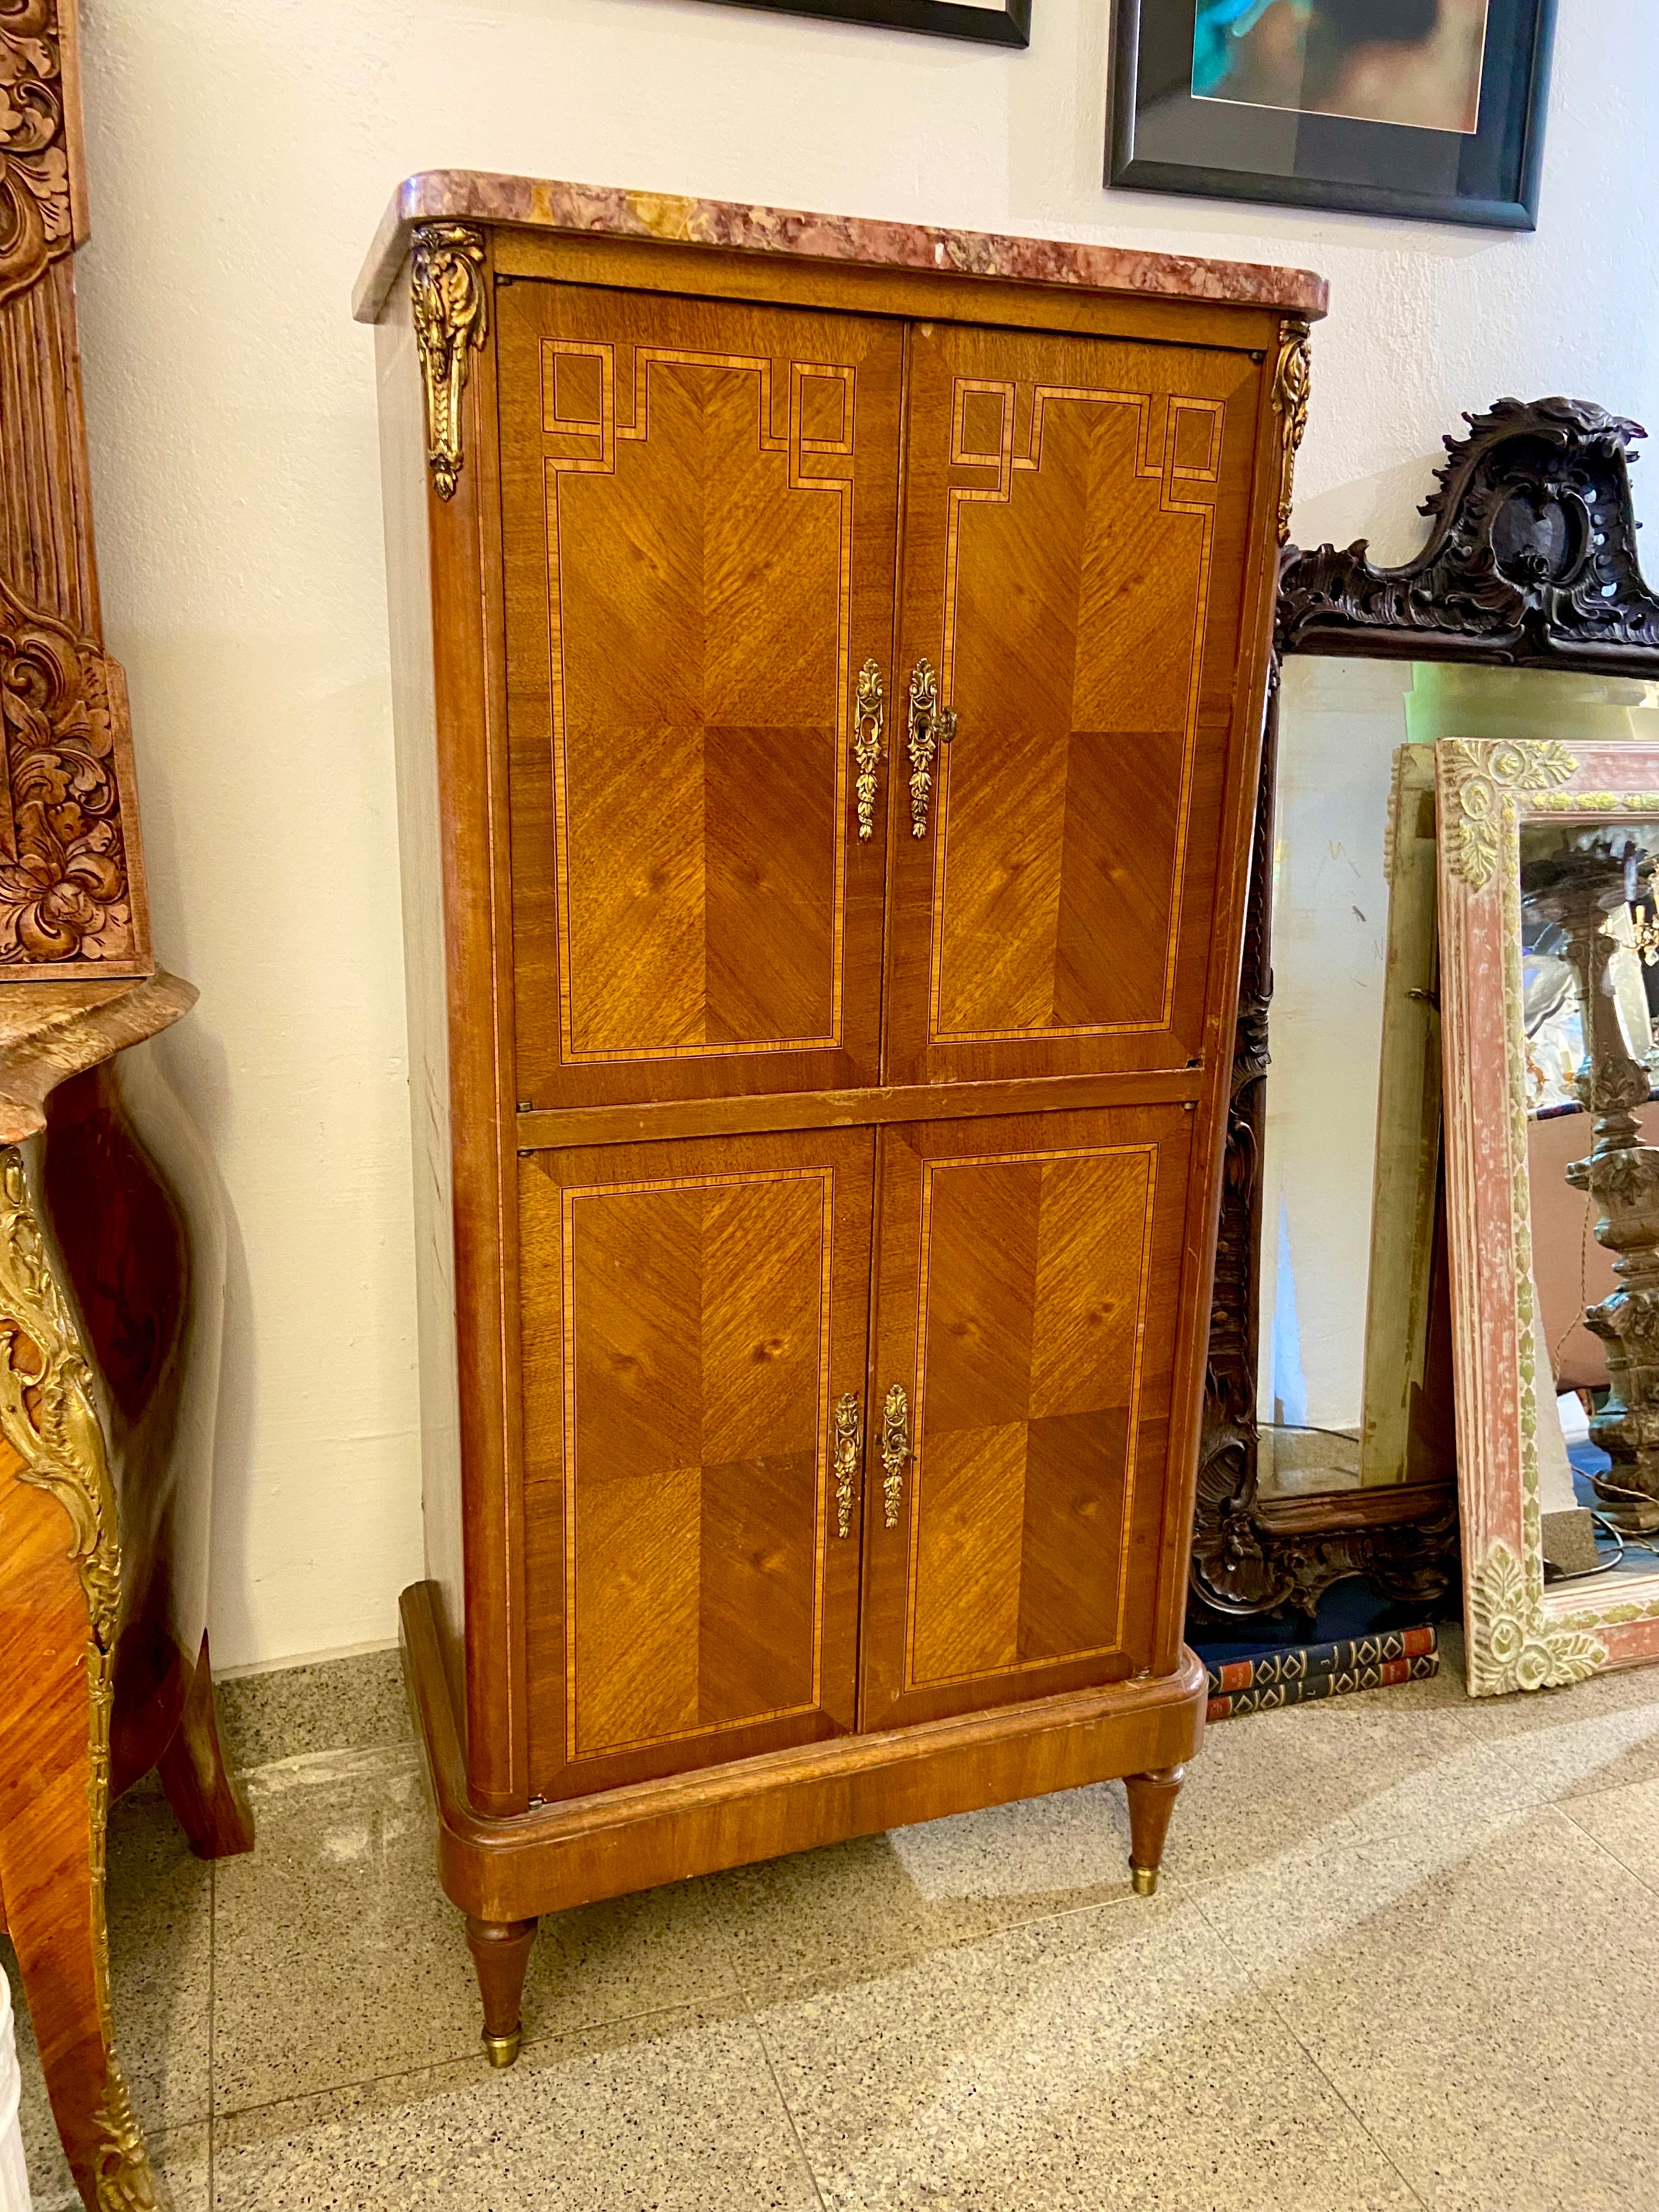 19th Century French mahogany cabinet in Louis XVI style with geometric patterns on both front and sides. The top surface is made of rose marble and there are two compartments each one with two doors and original keys. Could be used as a dry bar as